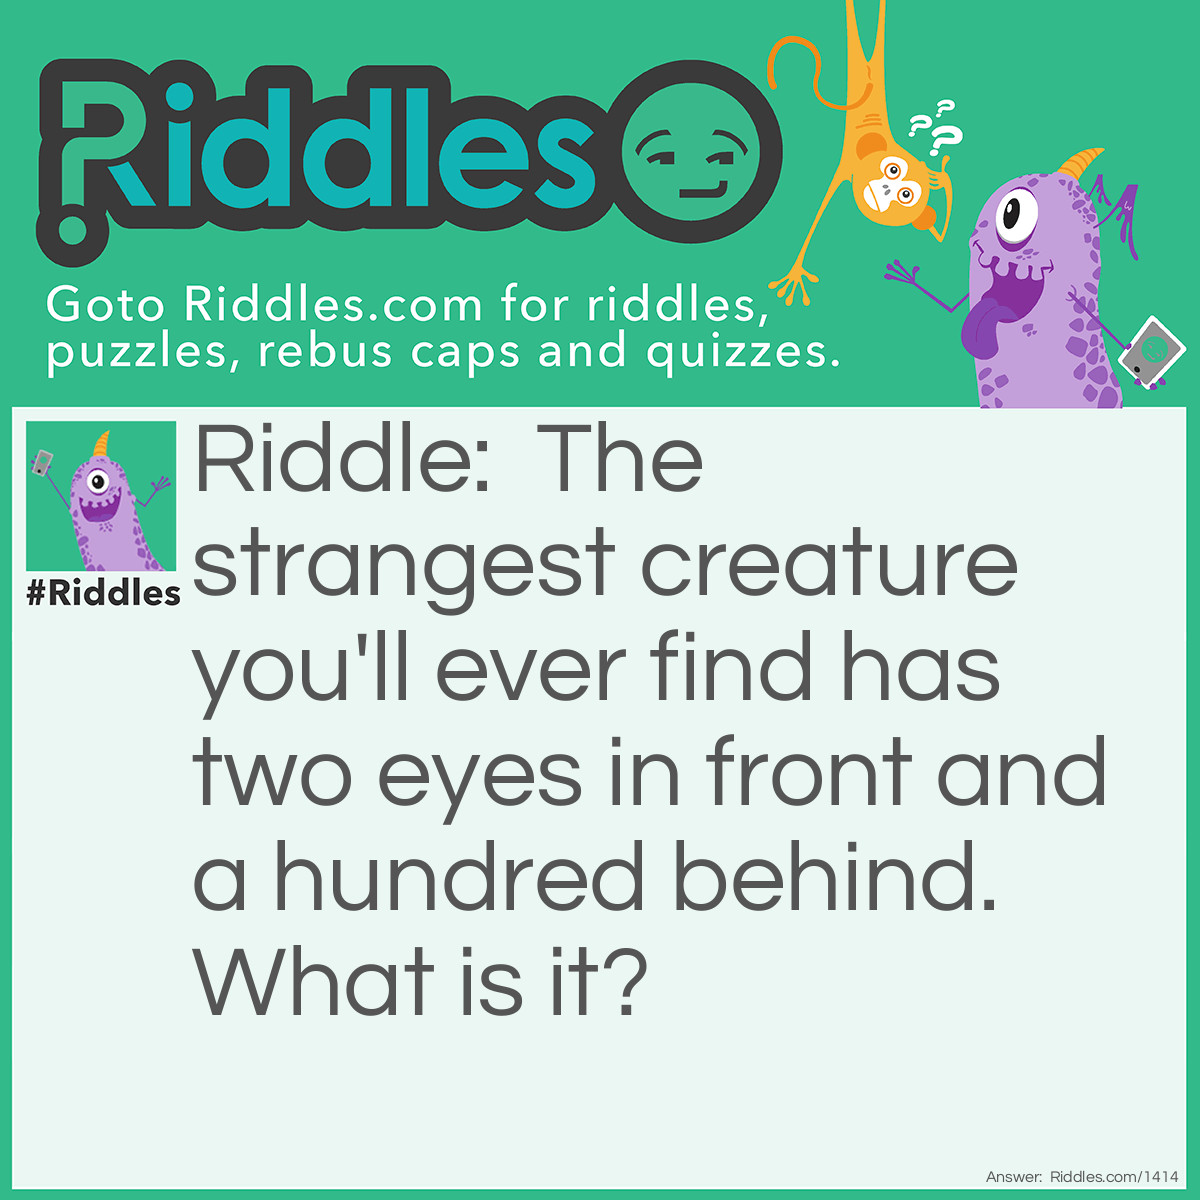 Riddle: The strangest creature you'll ever find has two eyes in front and a hundred behind. What is it? Answer: A peacock.